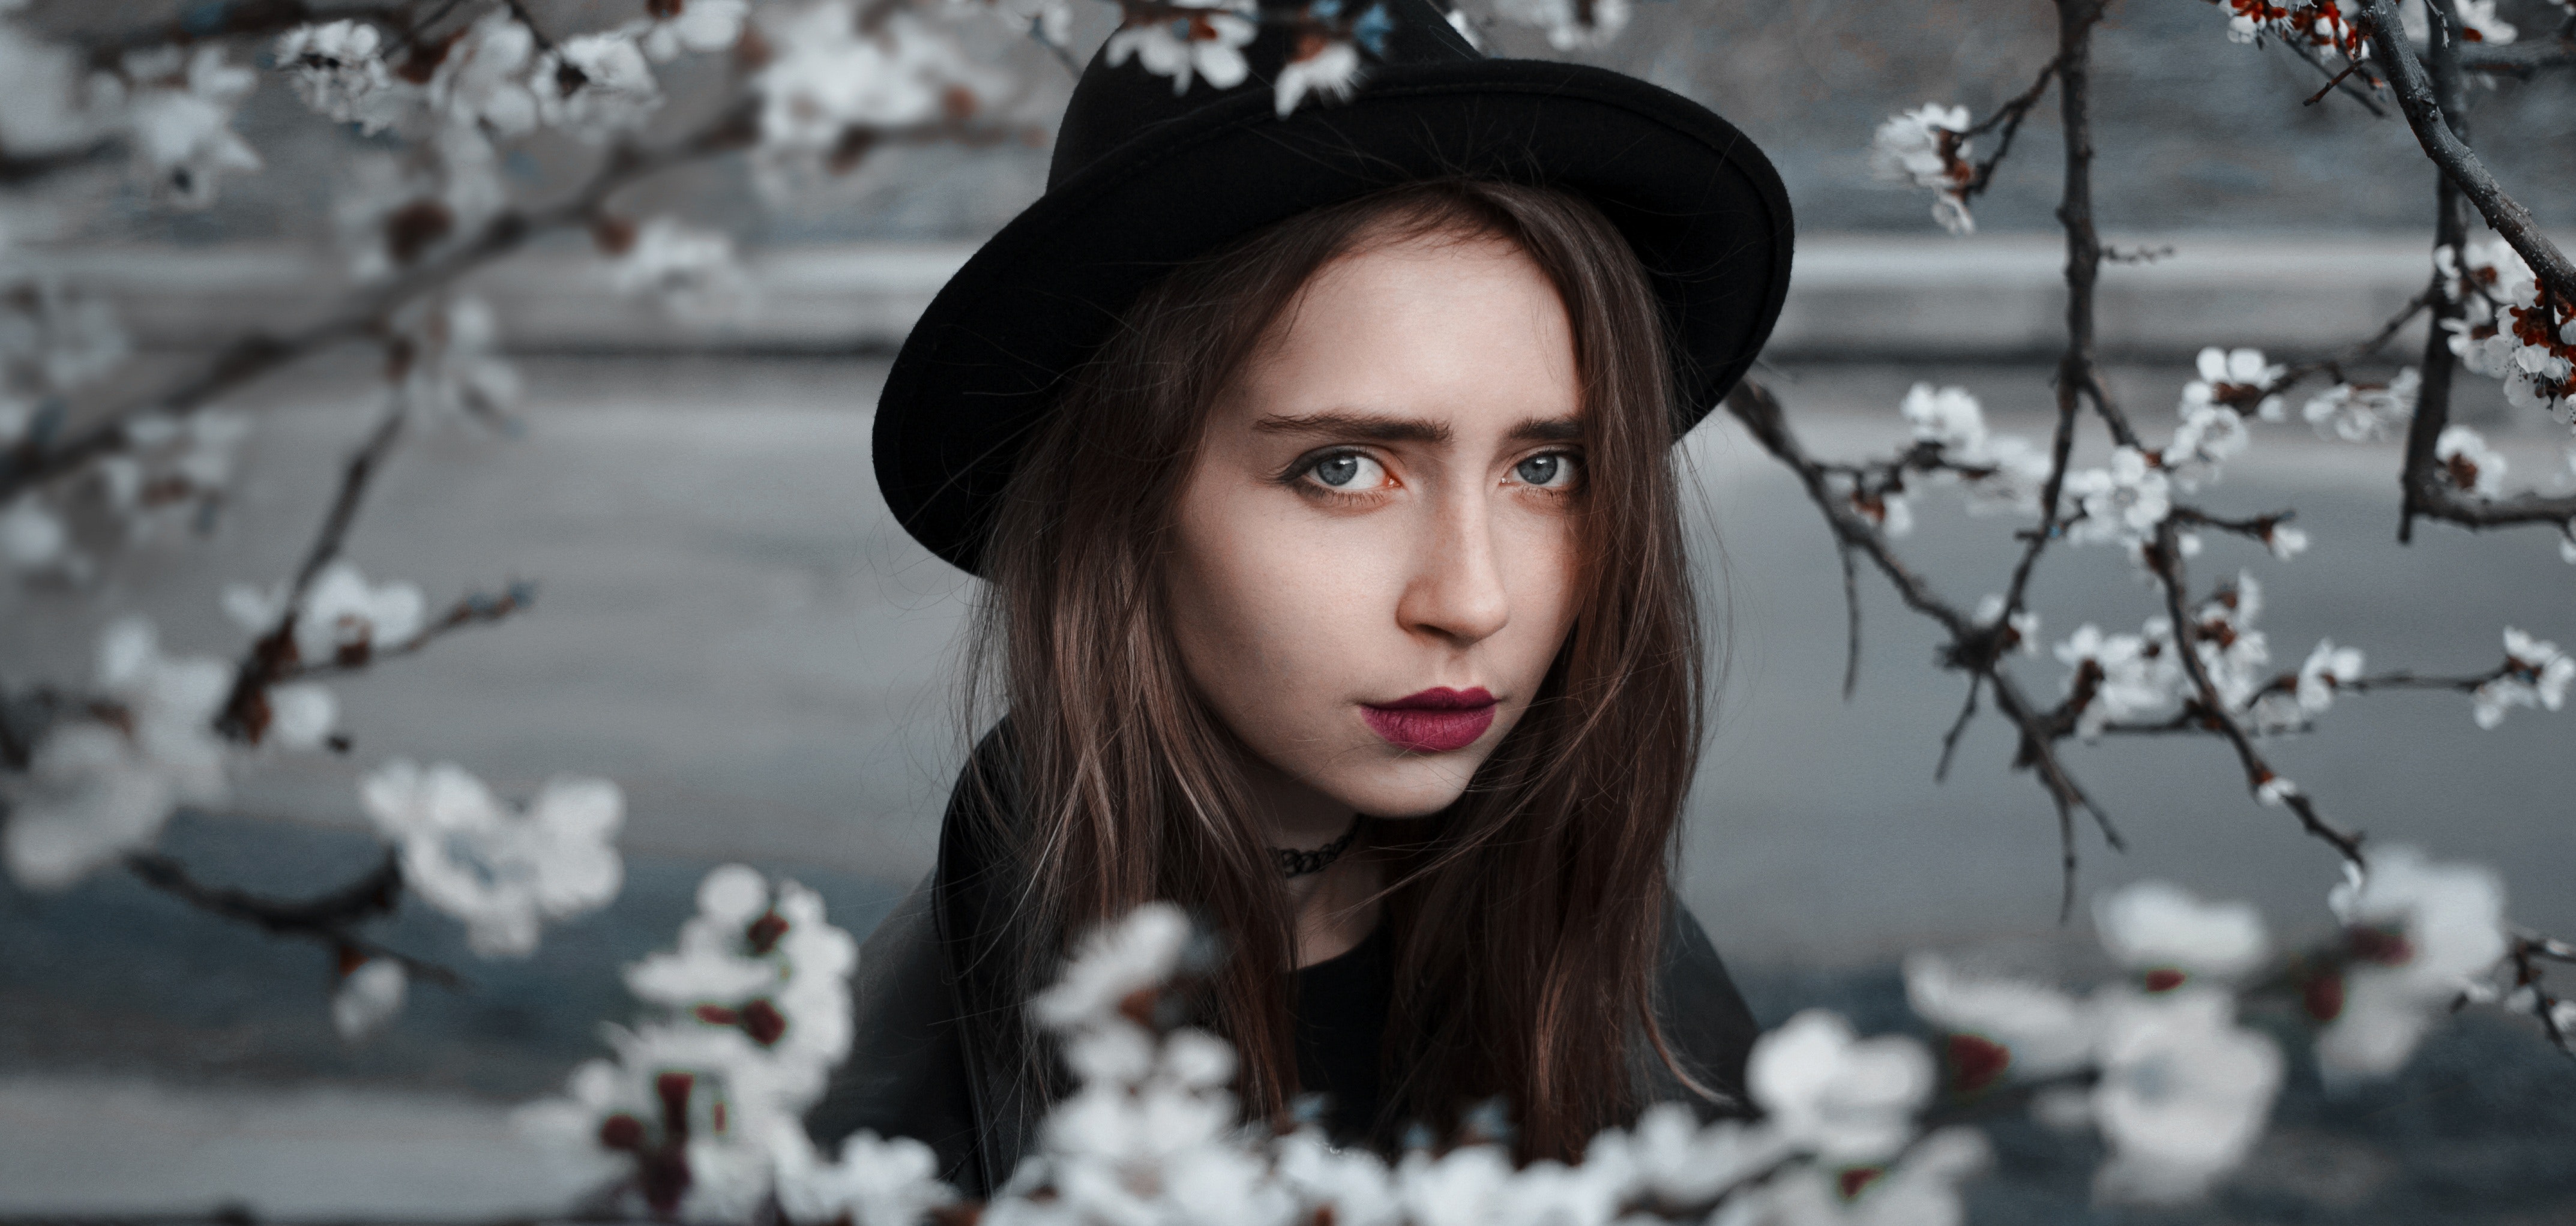 Woman wearing black hat and dress with red lipstick near white flowers selective focus photography